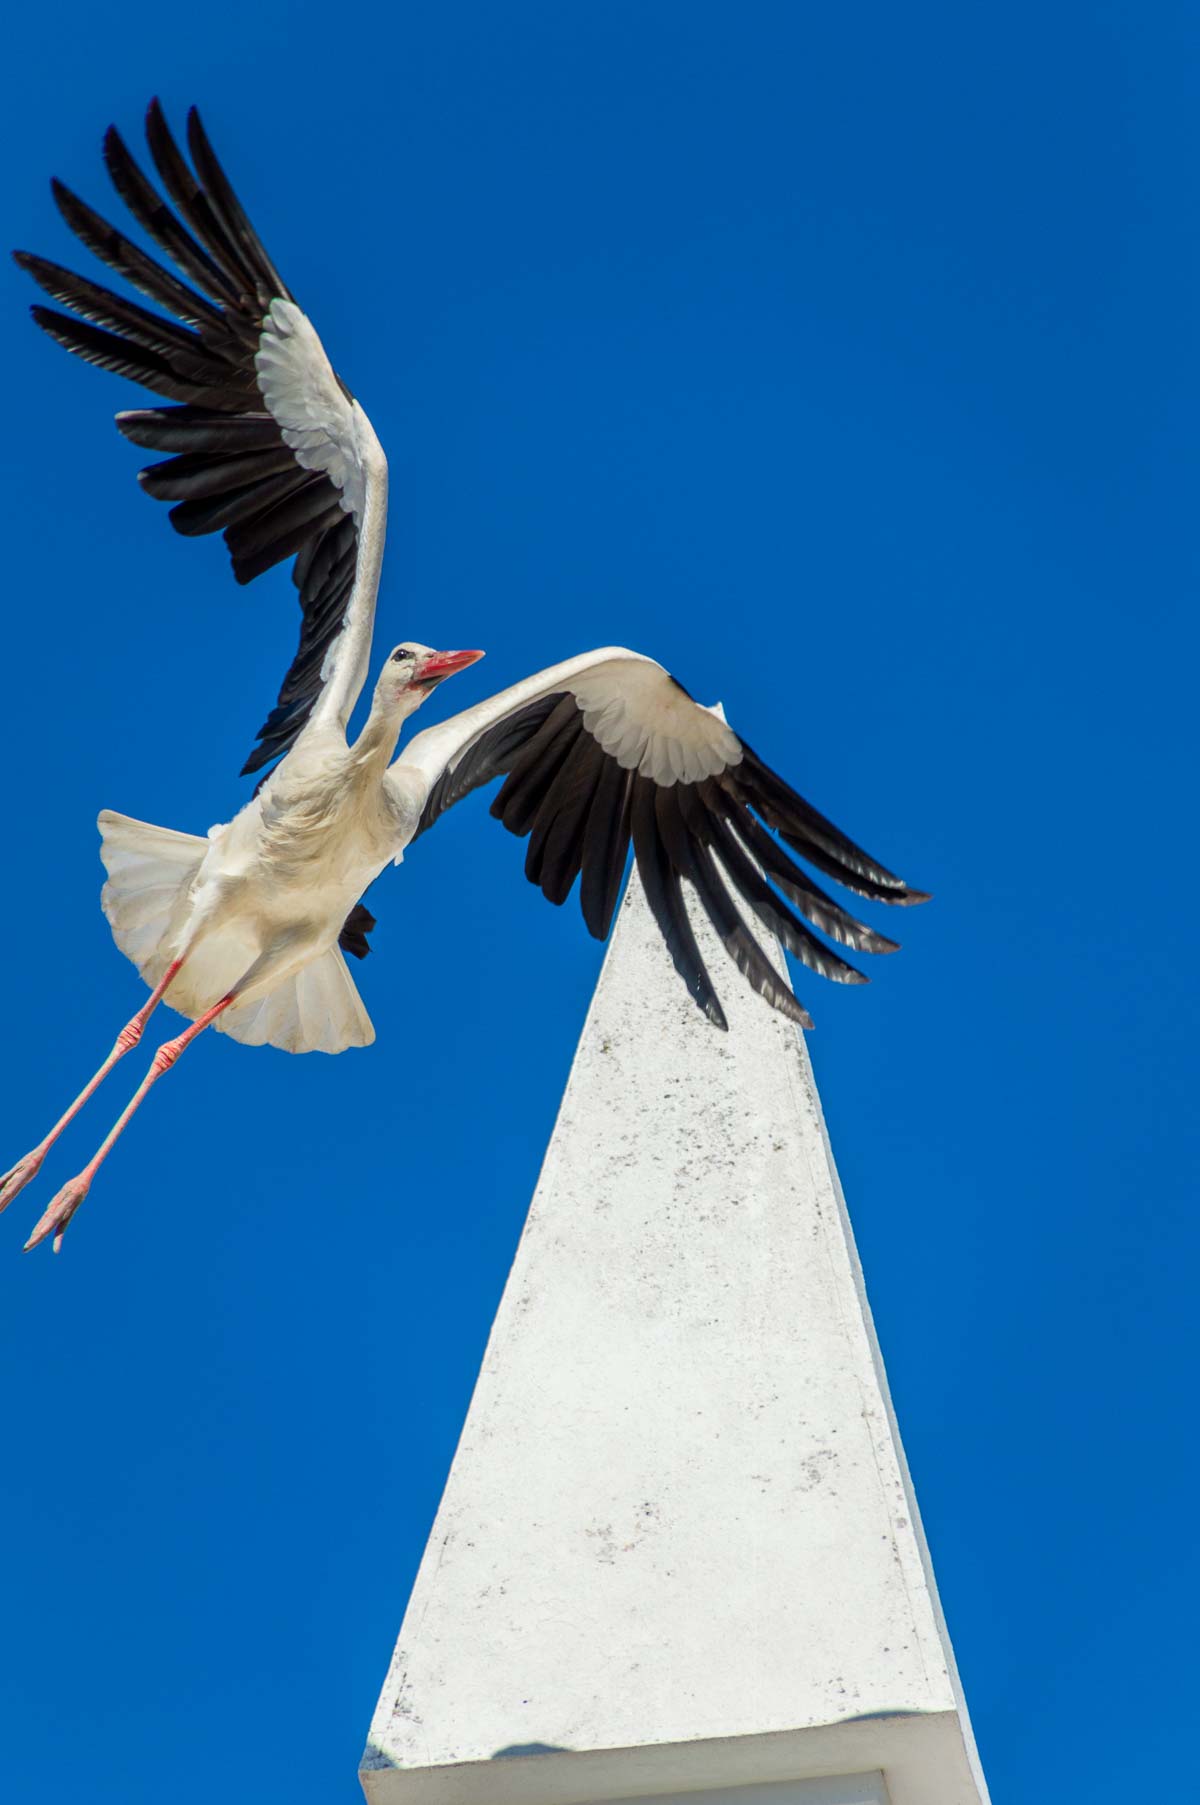 Stork taking off from it's nest on the top of a building.